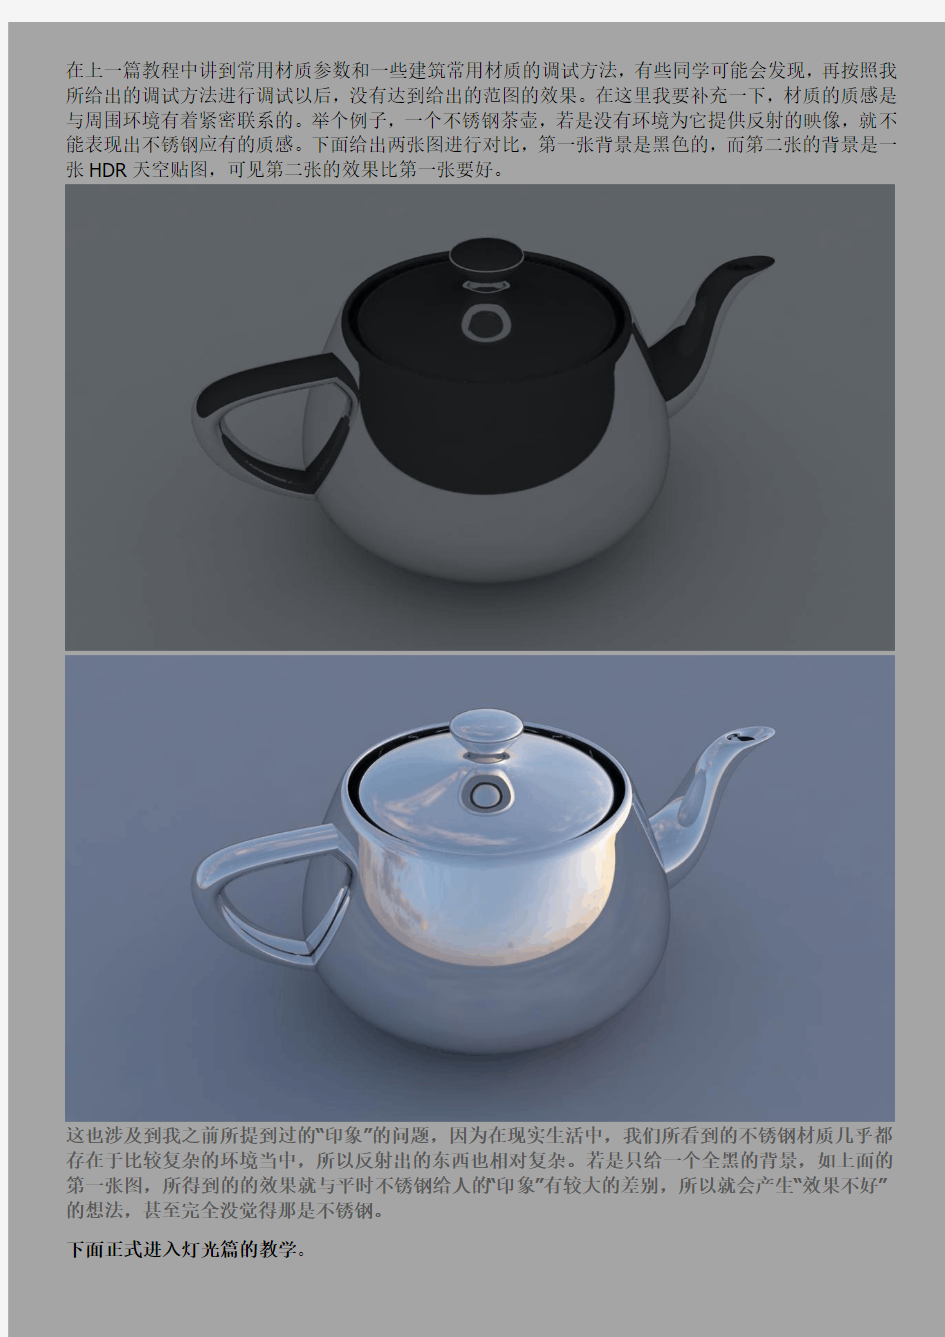 vray for sketchup渲染教程 ——灯光篇 